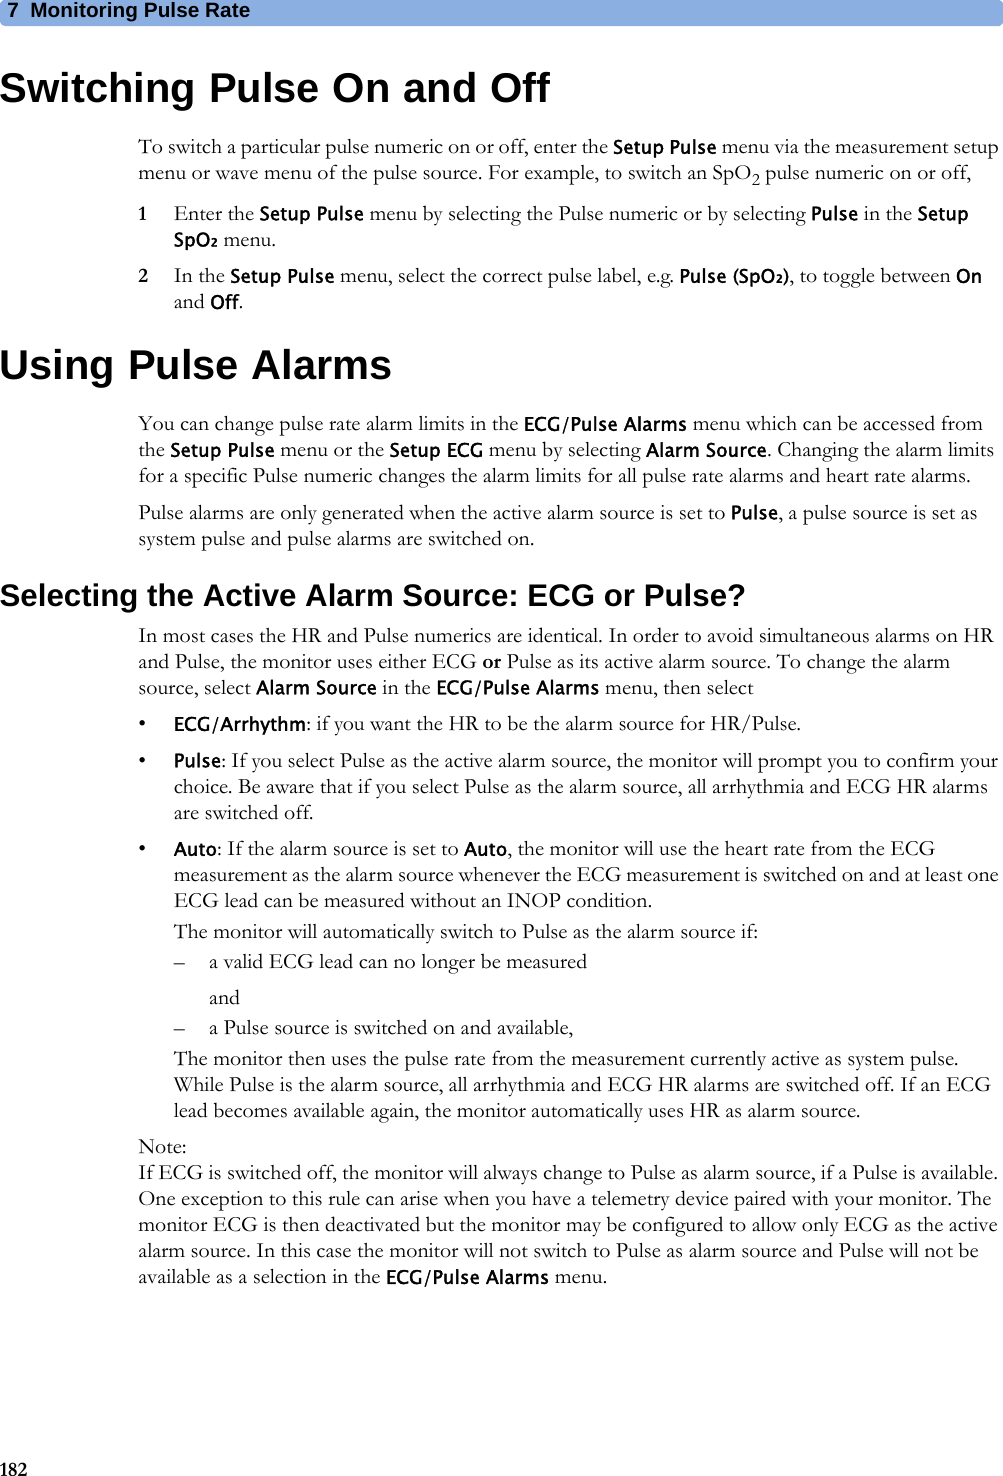 7 Monitoring Pulse Rate182Switching Pulse On and OffTo switch a particular pulse numeric on or off, enter the Setup Pulse menu via the measurement setup menu or wave menu of the pulse source. For example, to switch an SpO2 pulse numeric on or off,1Enter the Setup Pulse menu by selecting the Pulse numeric or by selecting Pulse in the Setup SpO₂ menu.2In the Setup Pulse menu, select the correct pulse label, e.g. Pulse (SpO₂), to toggle between On and Off.Using Pulse AlarmsYou can change pulse rate alarm limits in the ECG/Pulse Alarms menu which can be accessed from the Setup Pulse menu or the Setup ECG menu by selecting Alarm Source. Changing the alarm limits for a specific Pulse numeric changes the alarm limits for all pulse rate alarms and heart rate alarms.Pulse alarms are only generated when the active alarm source is set to Pulse, a pulse source is set as system pulse and pulse alarms are switched on.Selecting the Active Alarm Source: ECG or Pulse?In most cases the HR and Pulse numerics are identical. In order to avoid simultaneous alarms on HR and Pulse, the monitor uses either ECG or Pulse as its active alarm source. To change the alarm source, select Alarm Source in the ECG/Pulse Alarms menu, then select•ECG/Arrhythm: if you want the HR to be the alarm source for HR/Pulse.•Pulse: If you select Pulse as the active alarm source, the monitor will prompt you to confirm your choice. Be aware that if you select Pulse as the alarm source, all arrhythmia and ECG HR alarms are switched off.•Auto: If the alarm source is set to Auto, the monitor will use the heart rate from the ECG measurement as the alarm source whenever the ECG measurement is switched on and at least one ECG lead can be measured without an INOP condition.The monitor will automatically switch to Pulse as the alarm source if:– a valid ECG lead can no longer be measuredand– a Pulse source is switched on and available,The monitor then uses the pulse rate from the measurement currently active as system pulse. While Pulse is the alarm source, all arrhythmia and ECG HR alarms are switched off. If an ECG lead becomes available again, the monitor automatically uses HR as alarm source.Note:If ECG is switched off, the monitor will always change to Pulse as alarm source, if a Pulse is available. One exception to this rule can arise when you have a telemetry device paired with your monitor. The monitor ECG is then deactivated but the monitor may be configured to allow only ECG as the active alarm source. In this case the monitor will not switch to Pulse as alarm source and Pulse will not be available as a selection in the ECG/Pulse Alarms menu.